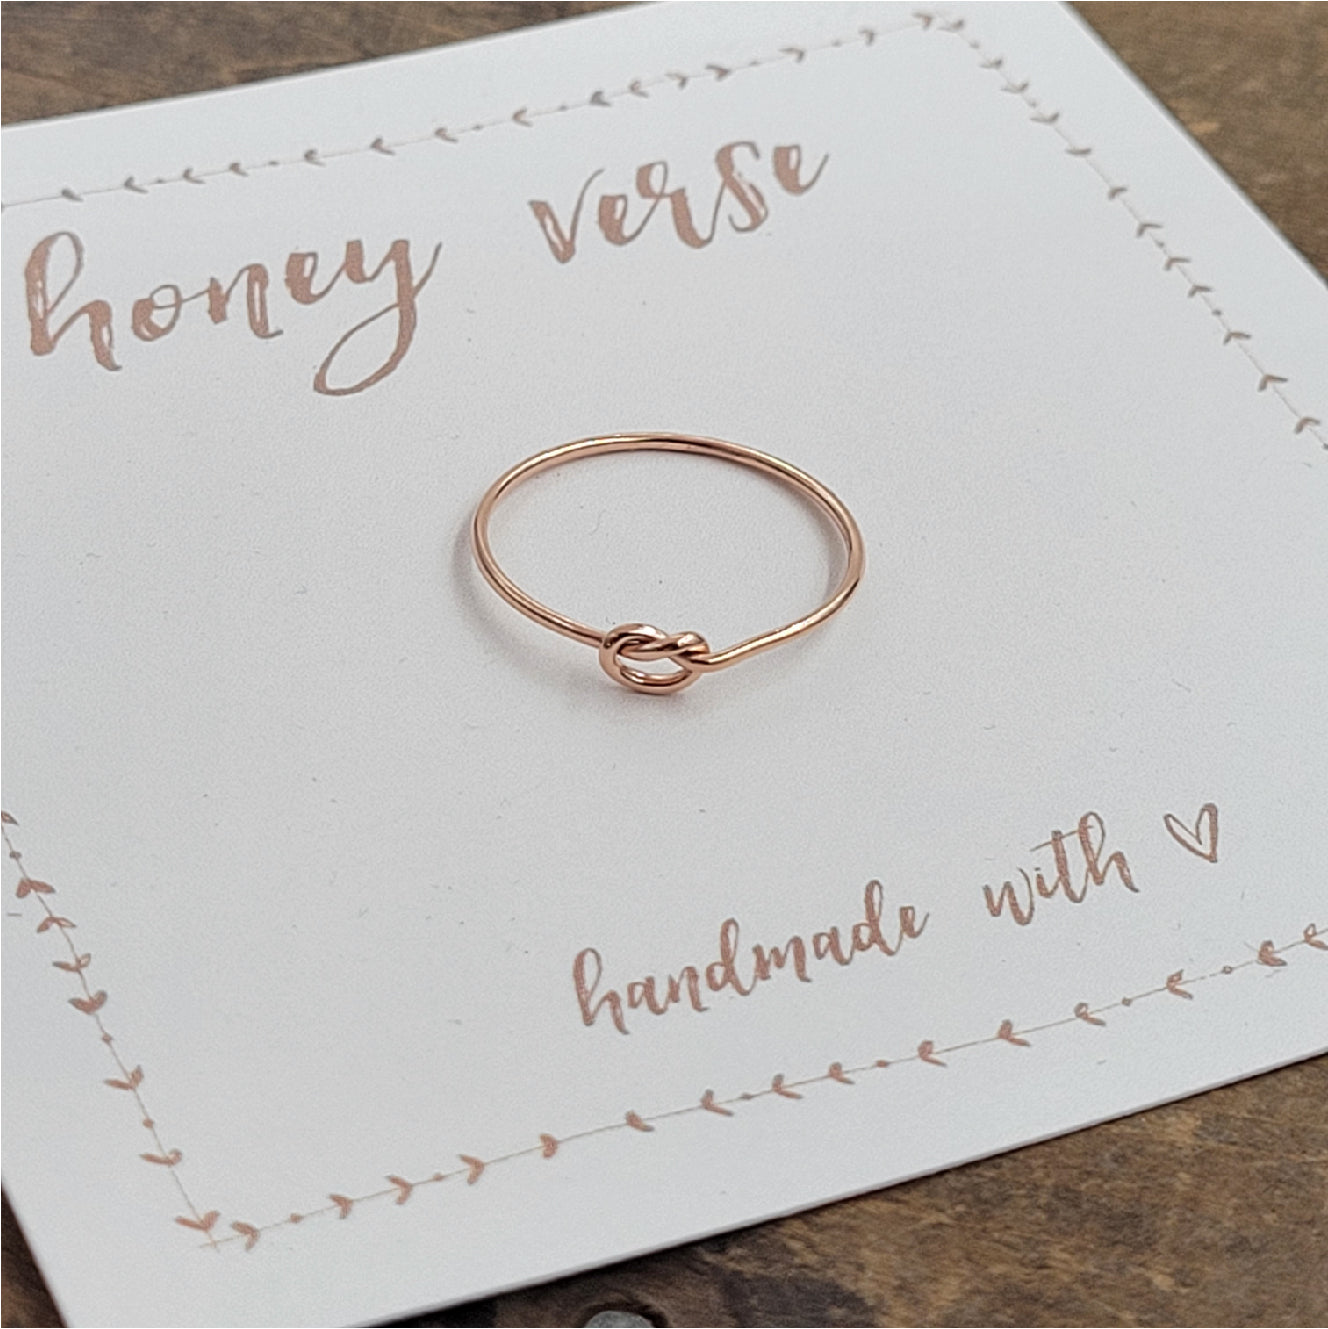 Tiny Knot Ring . Delicate Minimalist Knot Stacking Ring . Knotted Wire Stacking Ring . Valentines Jewelry . Gift for her . Anniversary